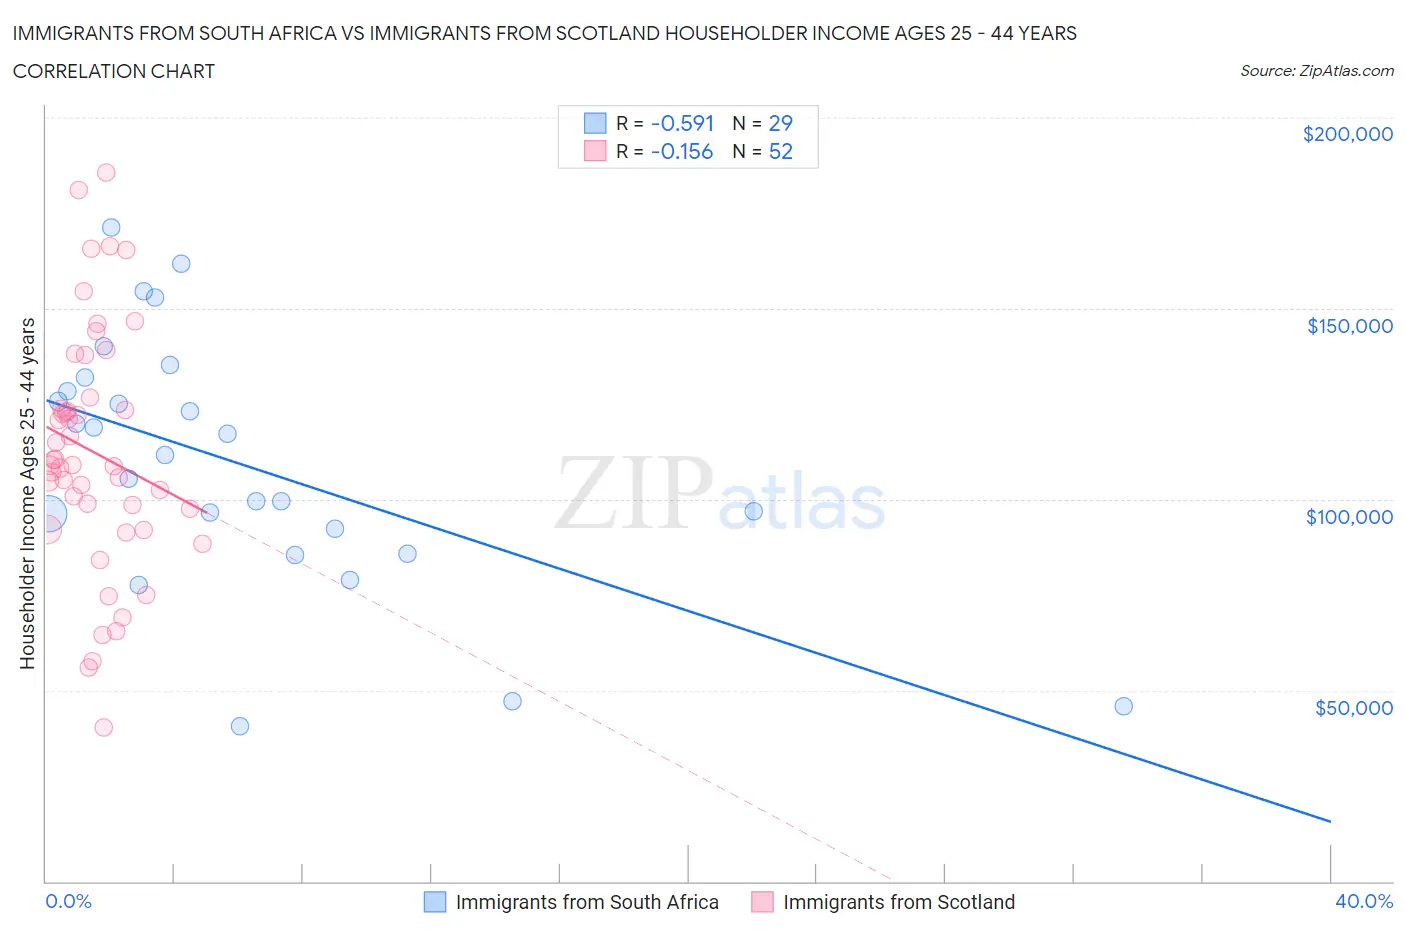 Immigrants from South Africa vs Immigrants from Scotland Householder Income Ages 25 - 44 years